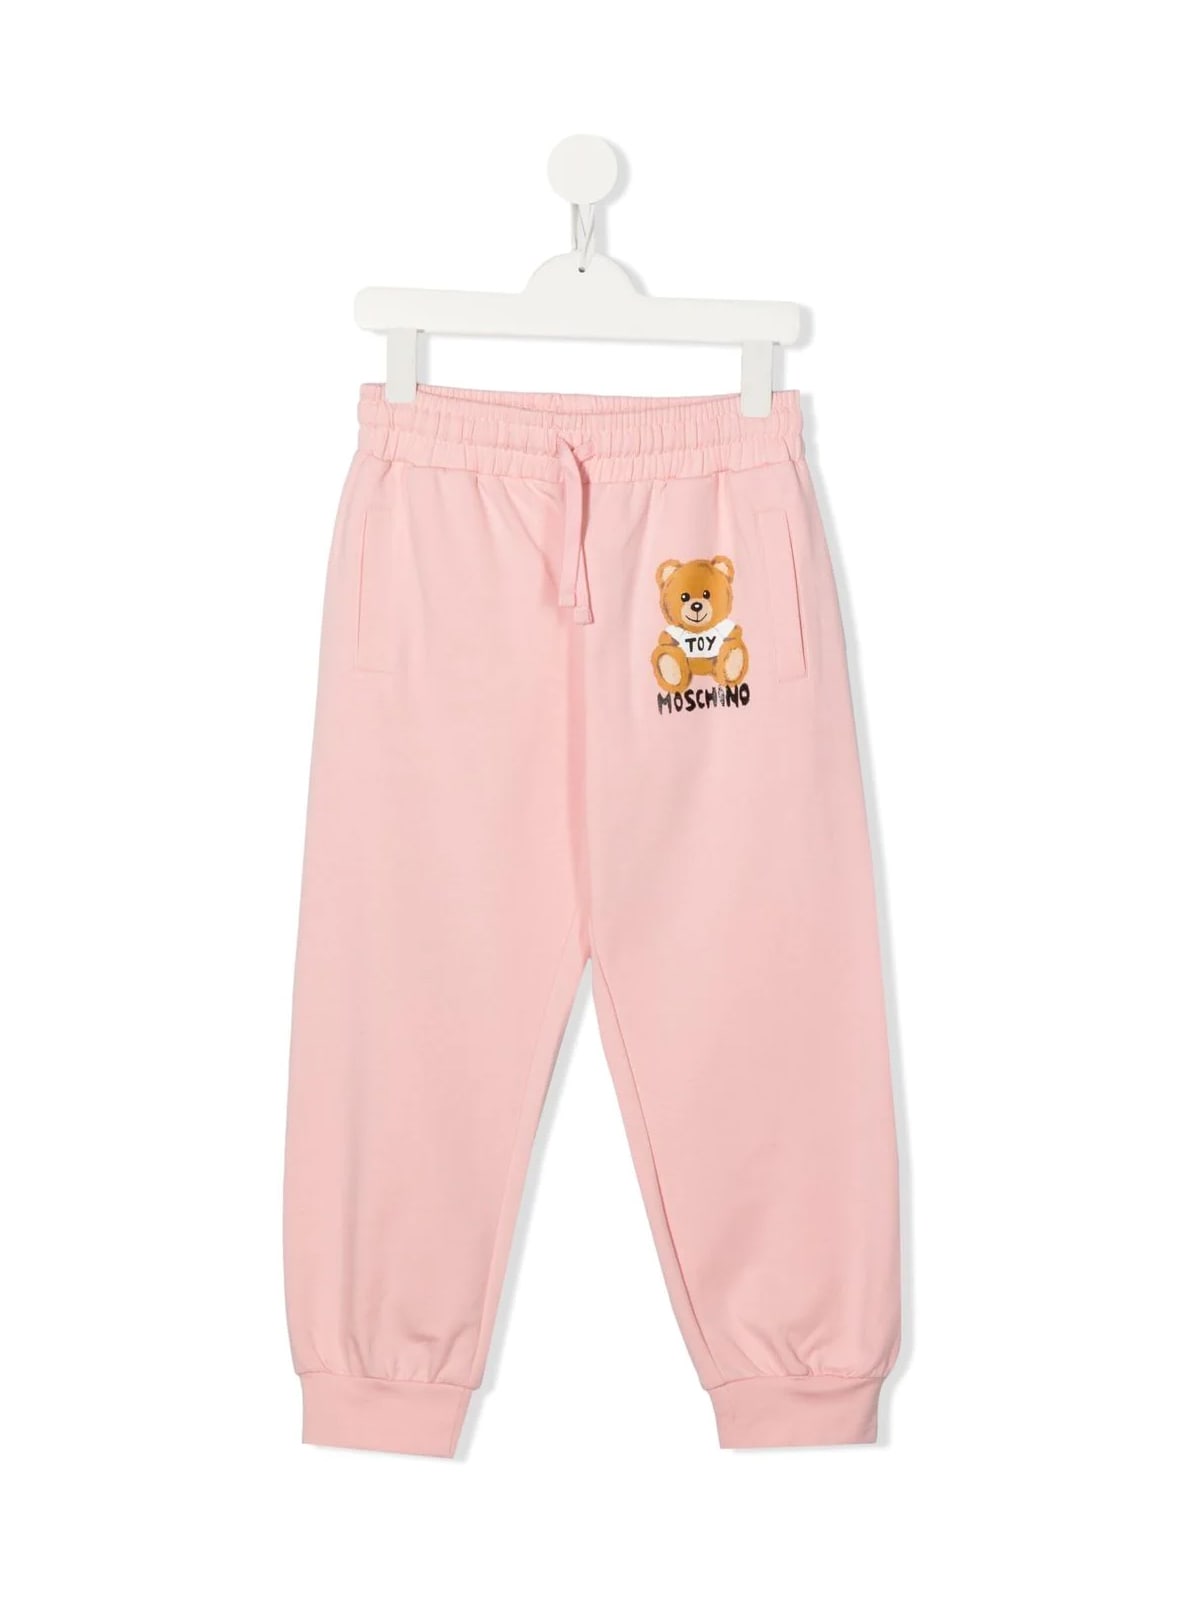 Moschino Sweatpants With Small Teddy Bear Print On One Front Pocket